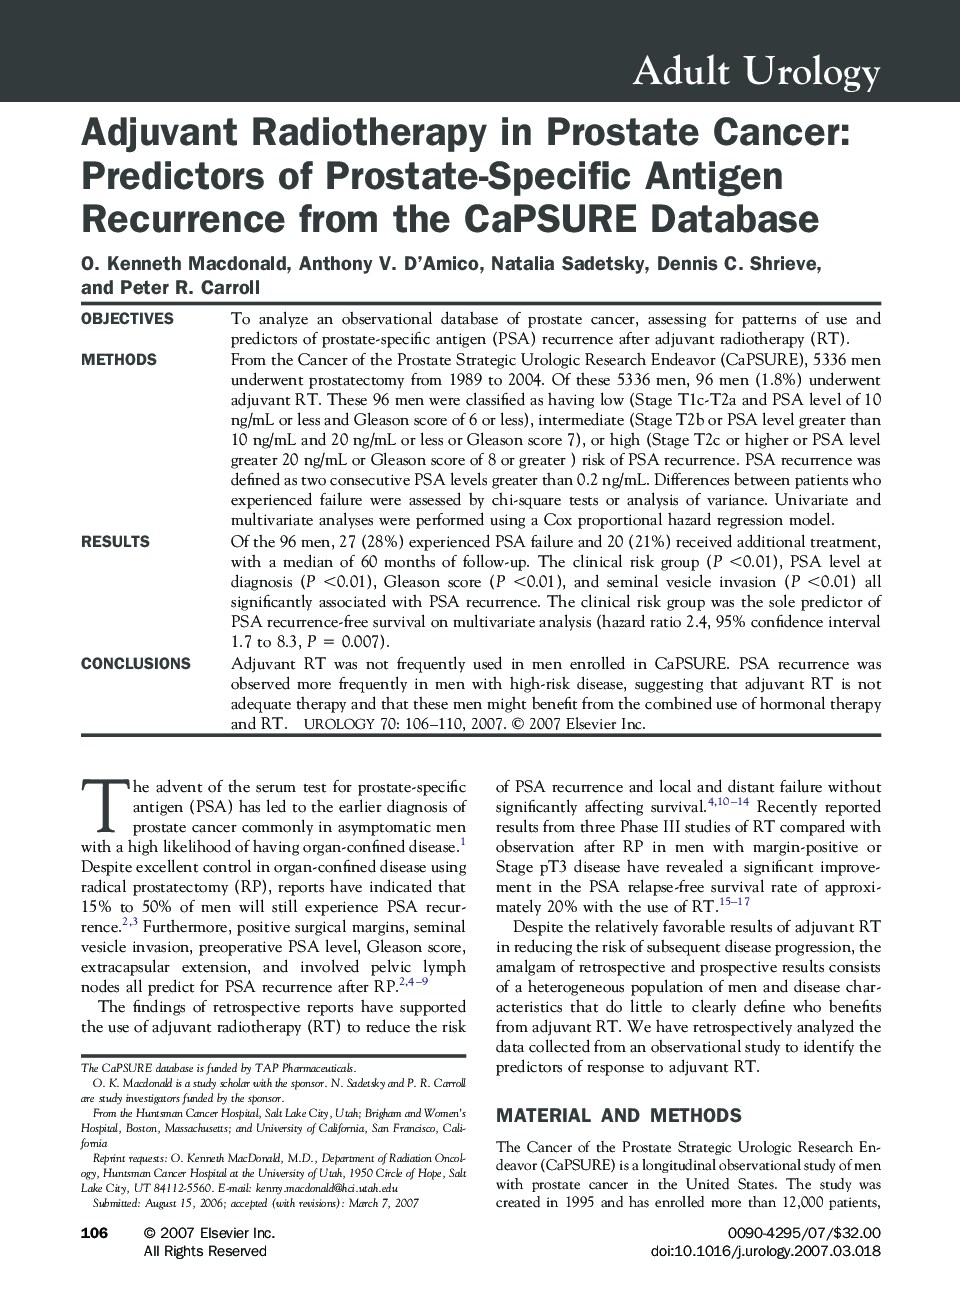 Adjuvant Radiotherapy in Prostate Cancer: Predictors of Prostate-Specific Antigen Recurrence from the CaPSURE Database